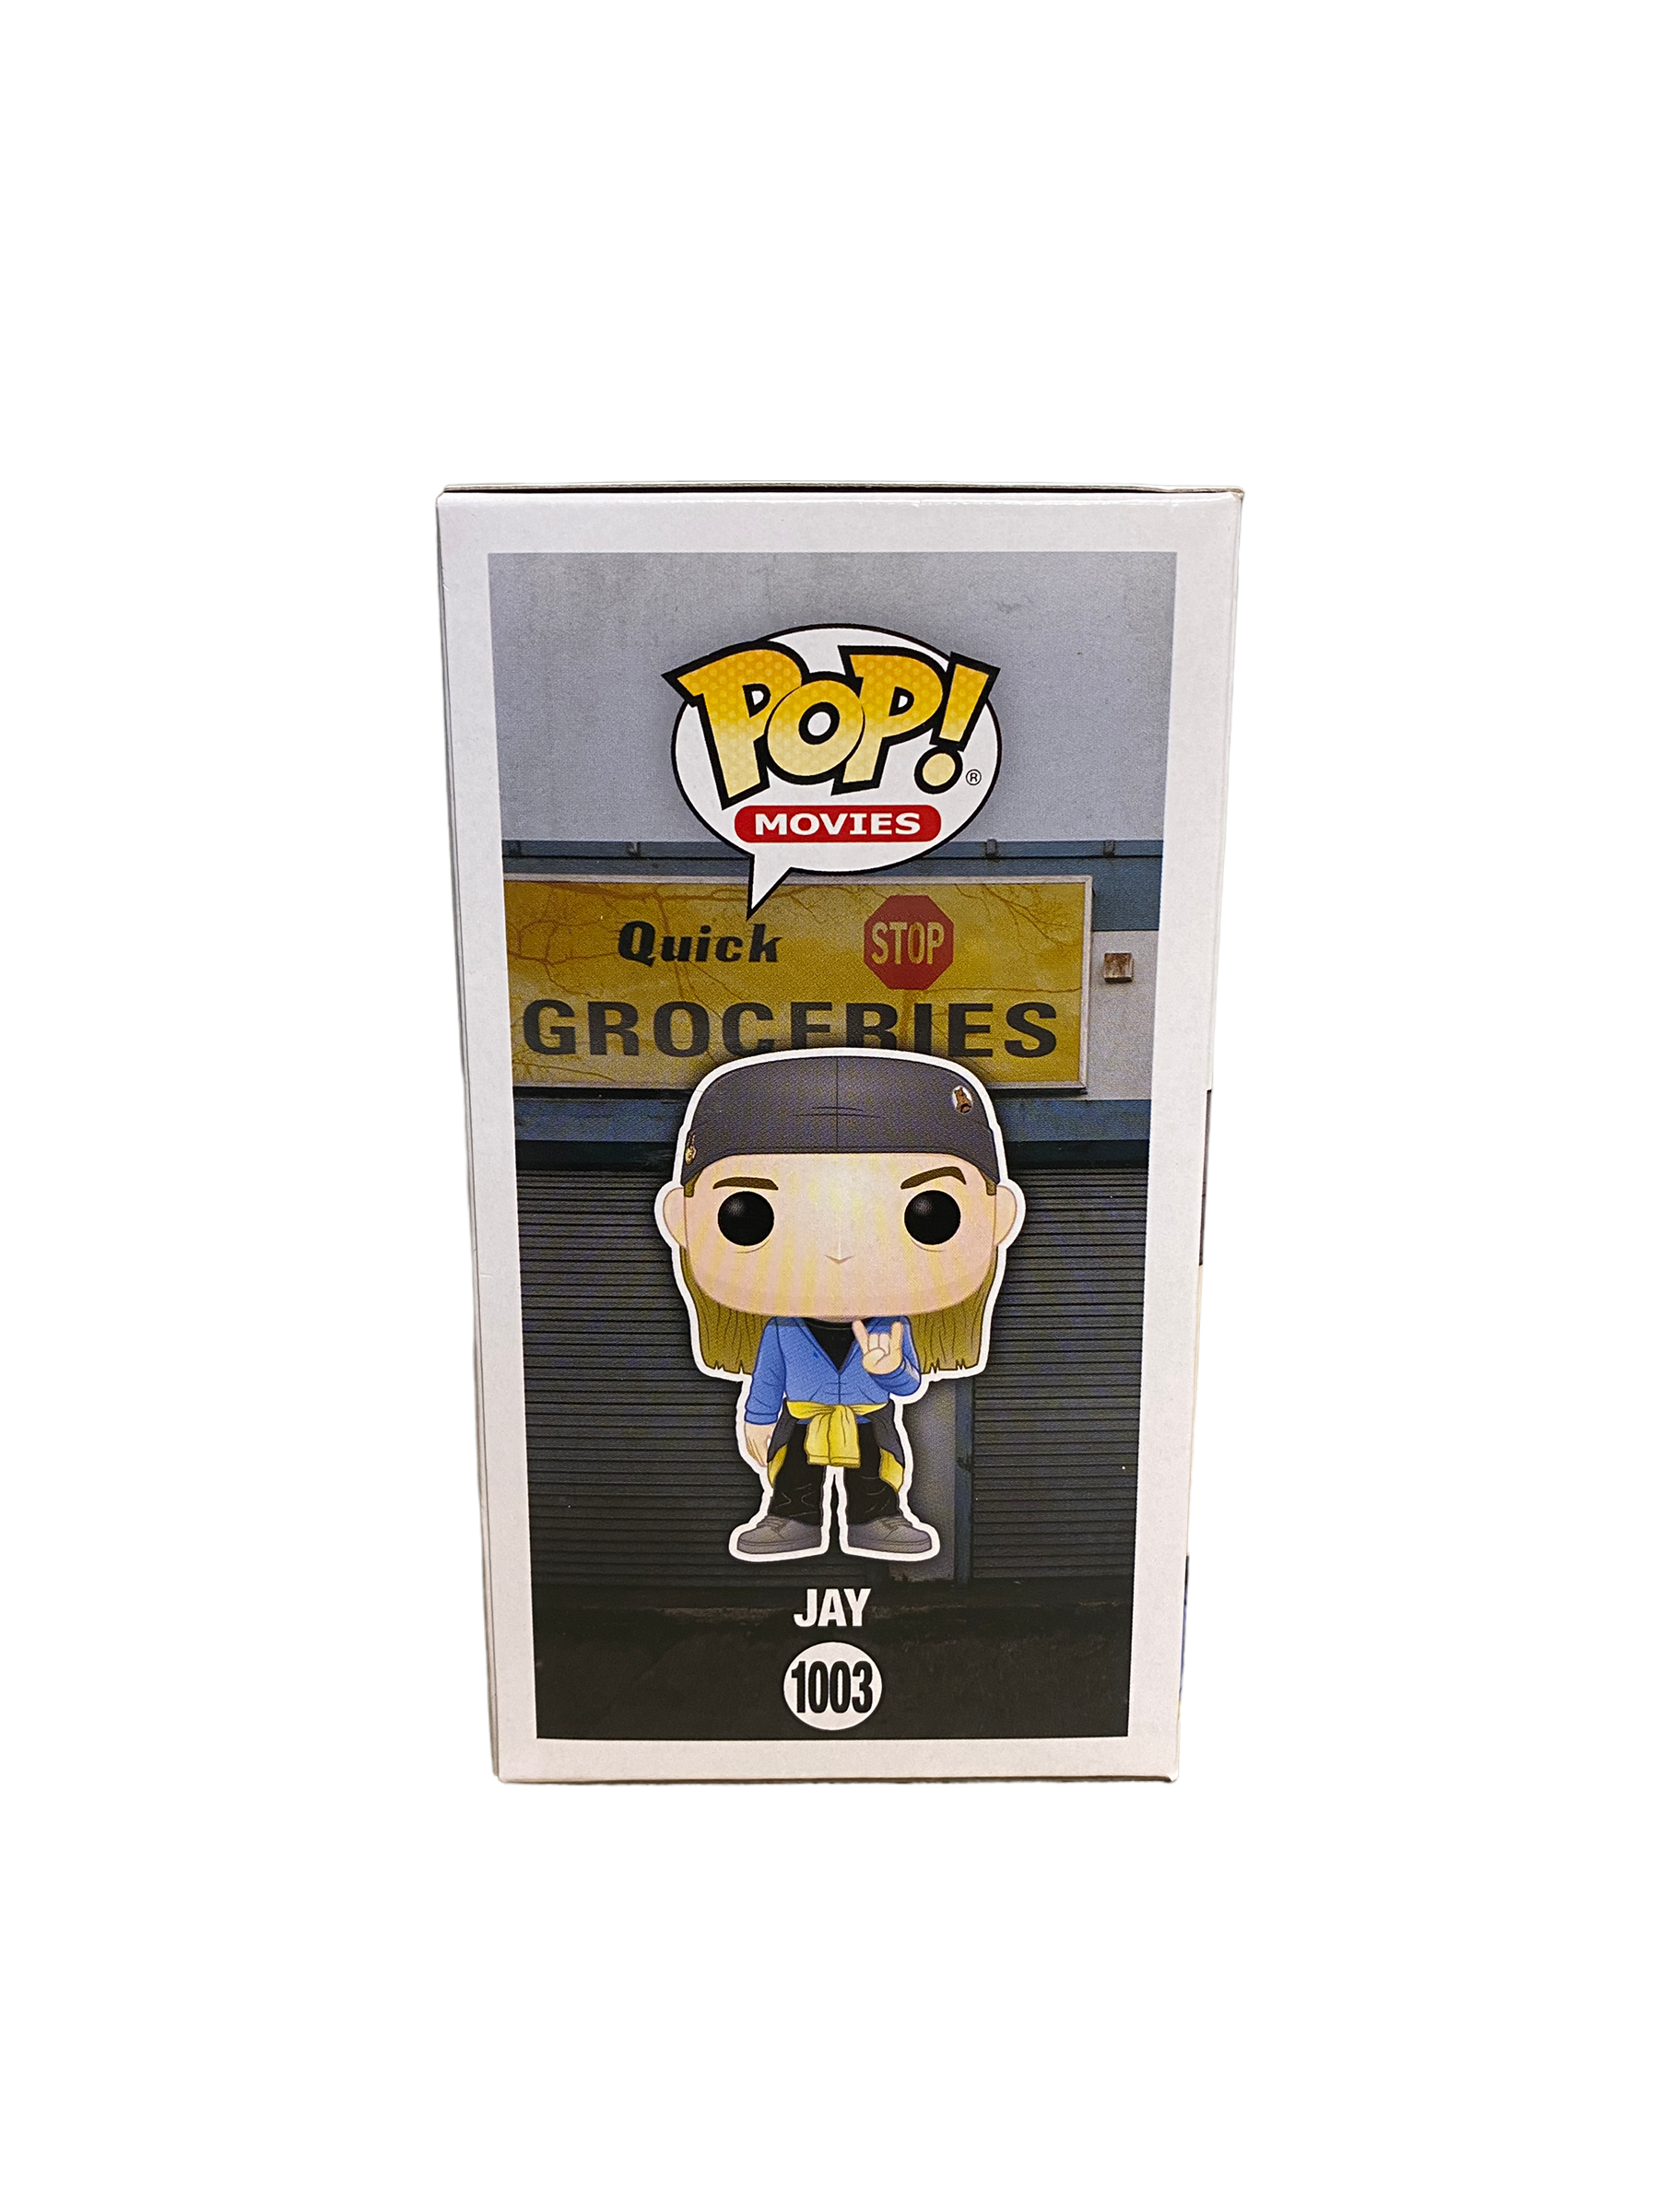 Jay #1003 Funko Pop! - Jay and Silent Bob Reboot - Popcultcha Exclusive - Condition 8/10